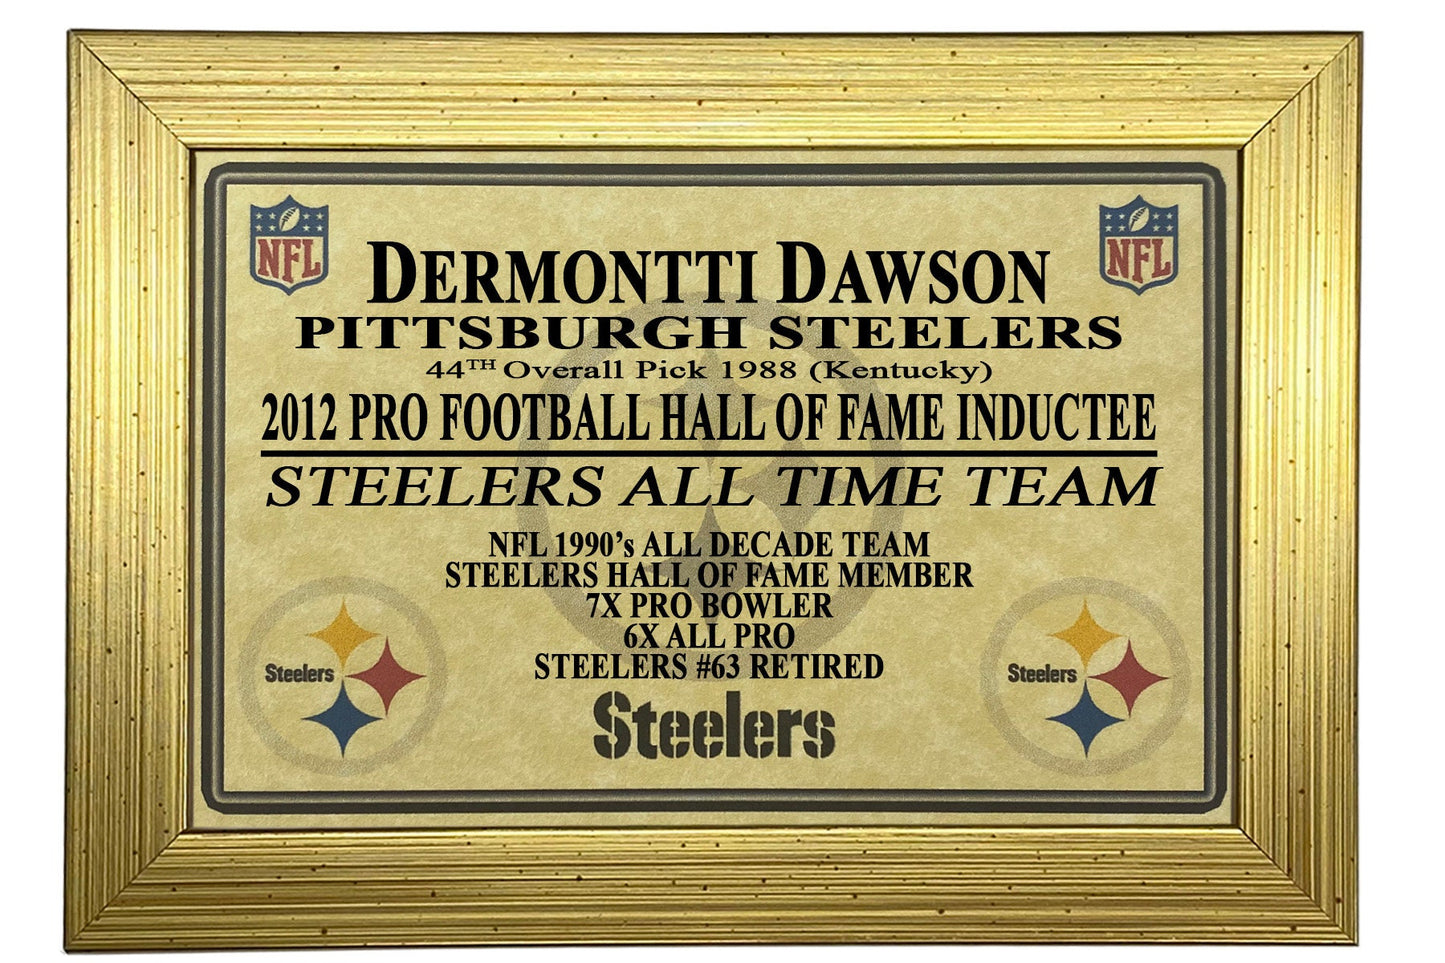 Premium Framed Dermontti Dawson Autographed / Signed Steelers Jersey – BAS COA